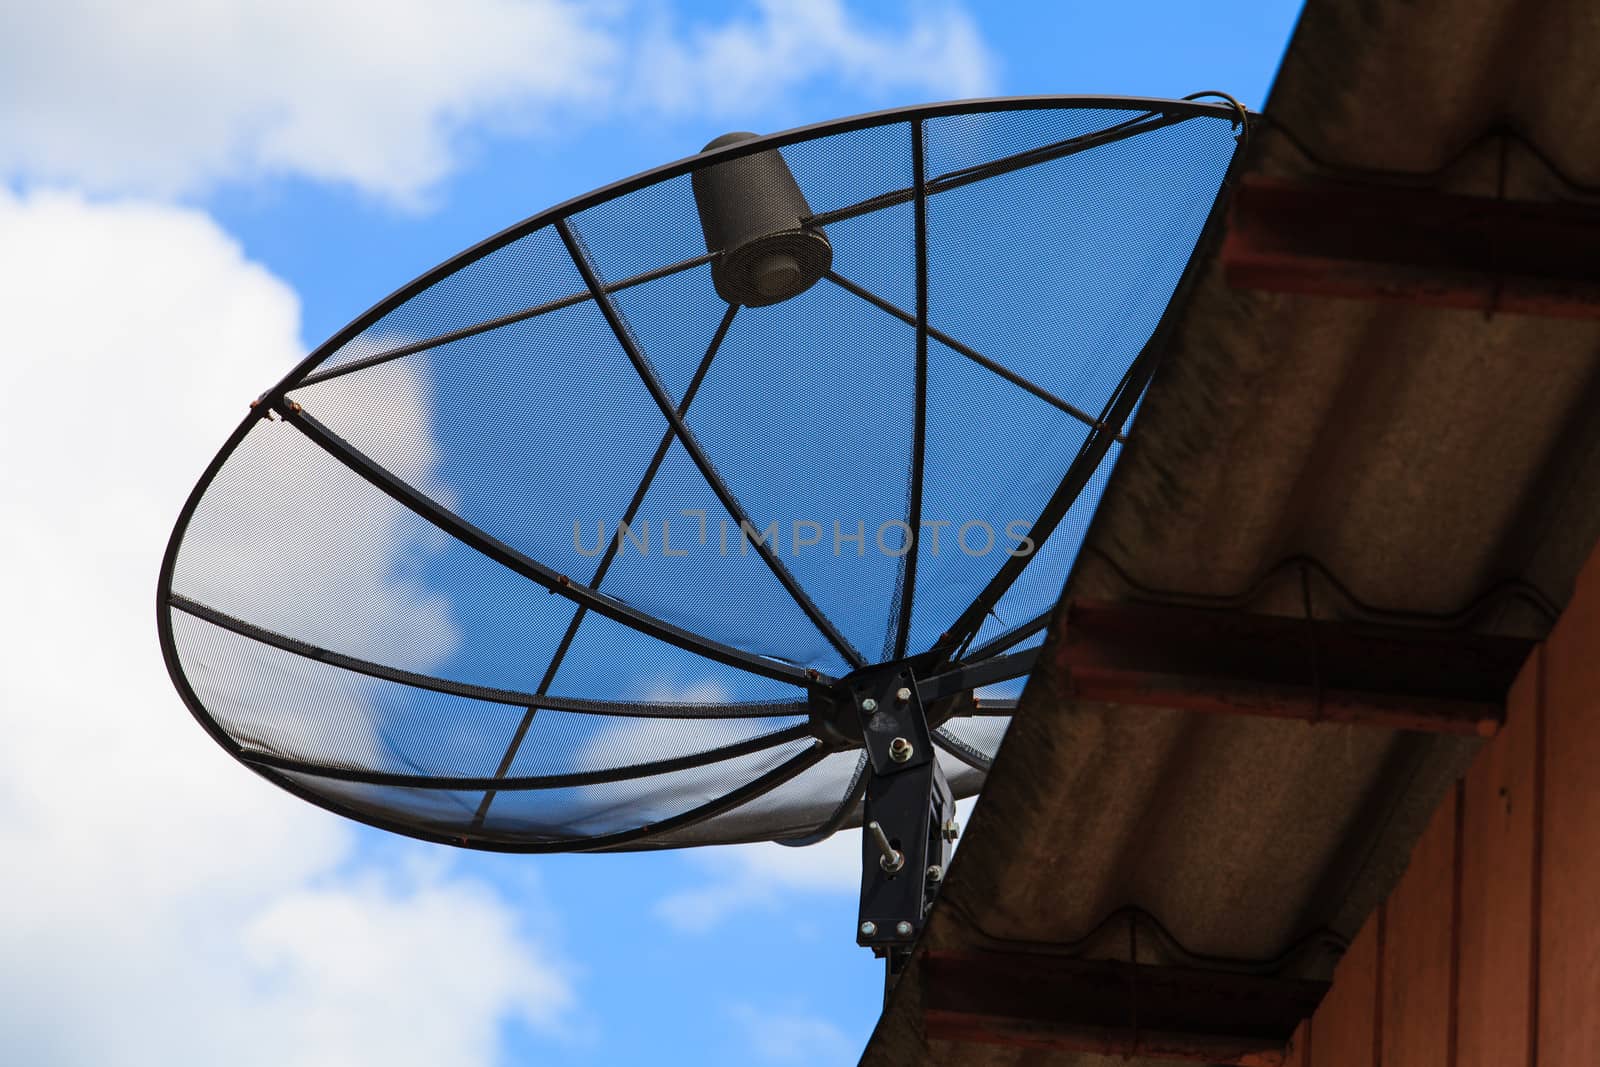 Satellite dish in morning sky  by thanomphong